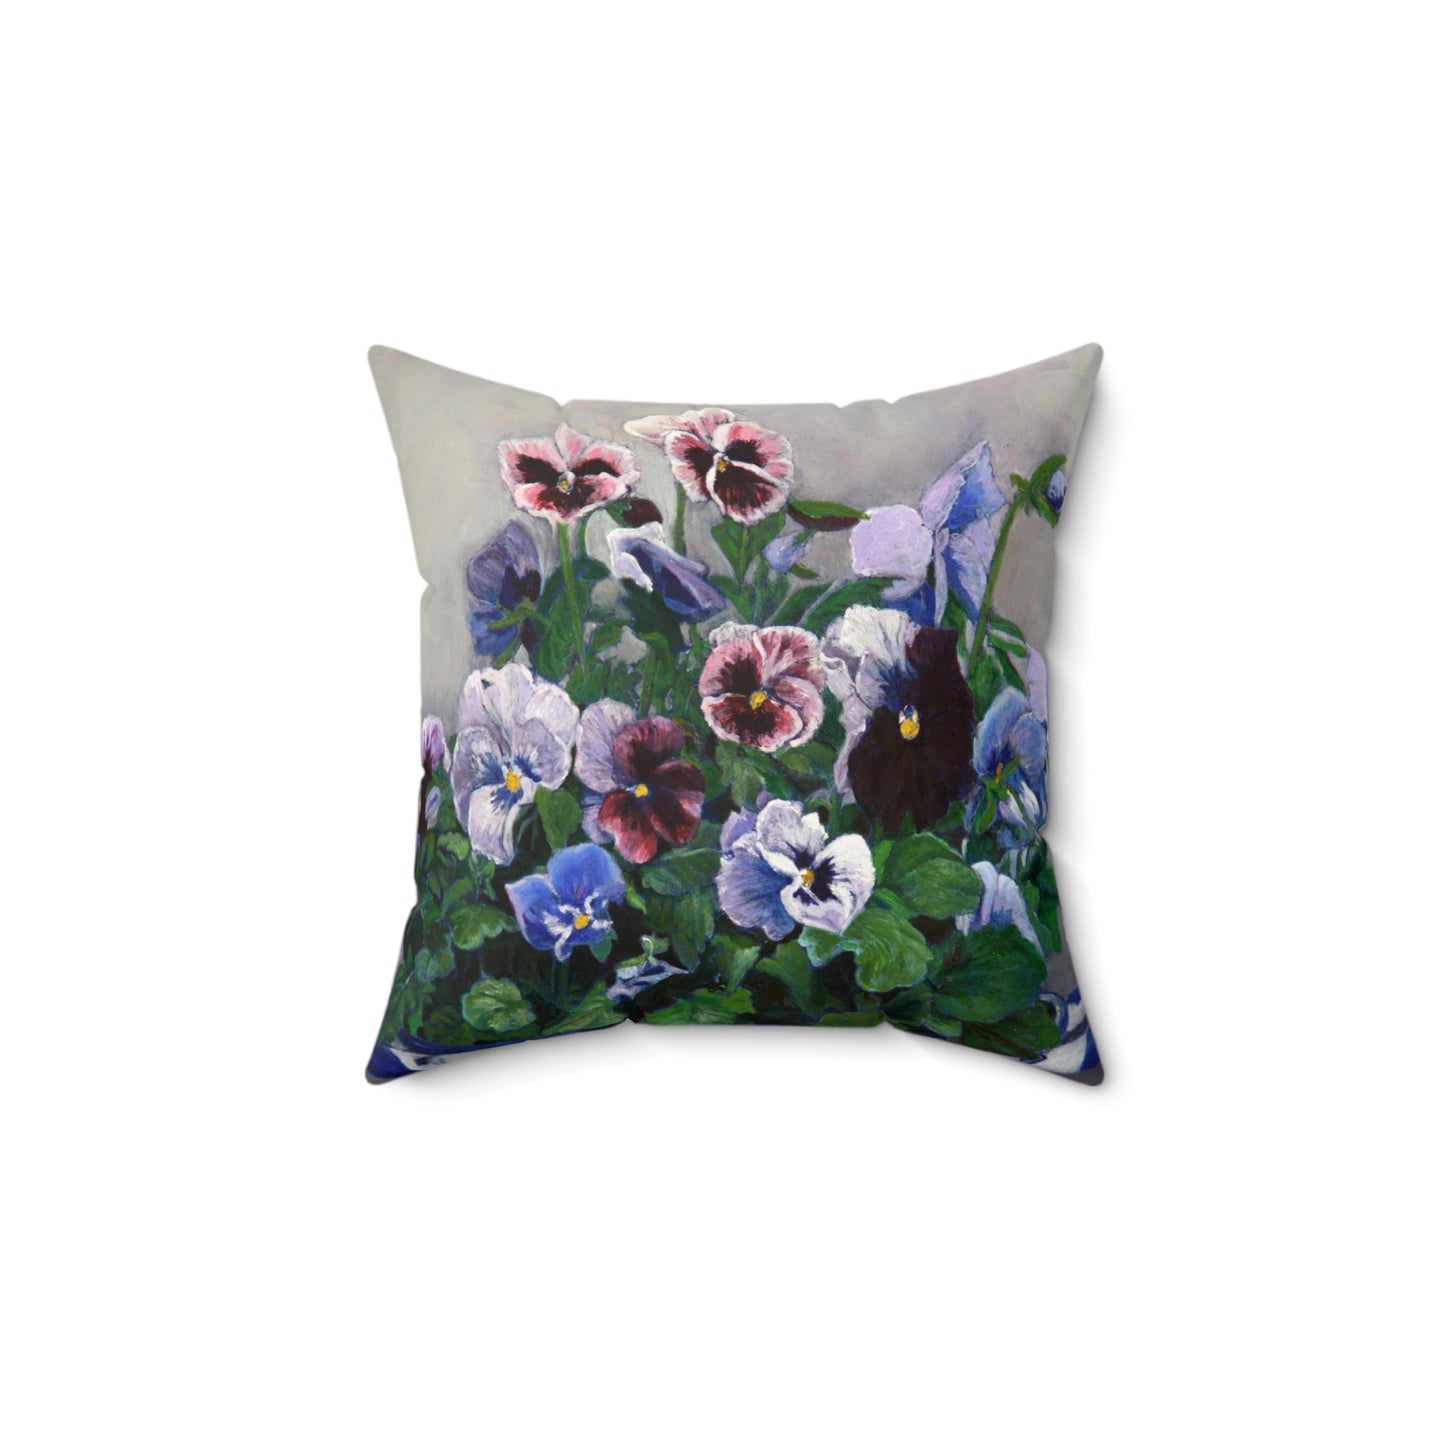 Pansies Floral Pillow -  Spun Polyester Square Throw Pillow with Insert